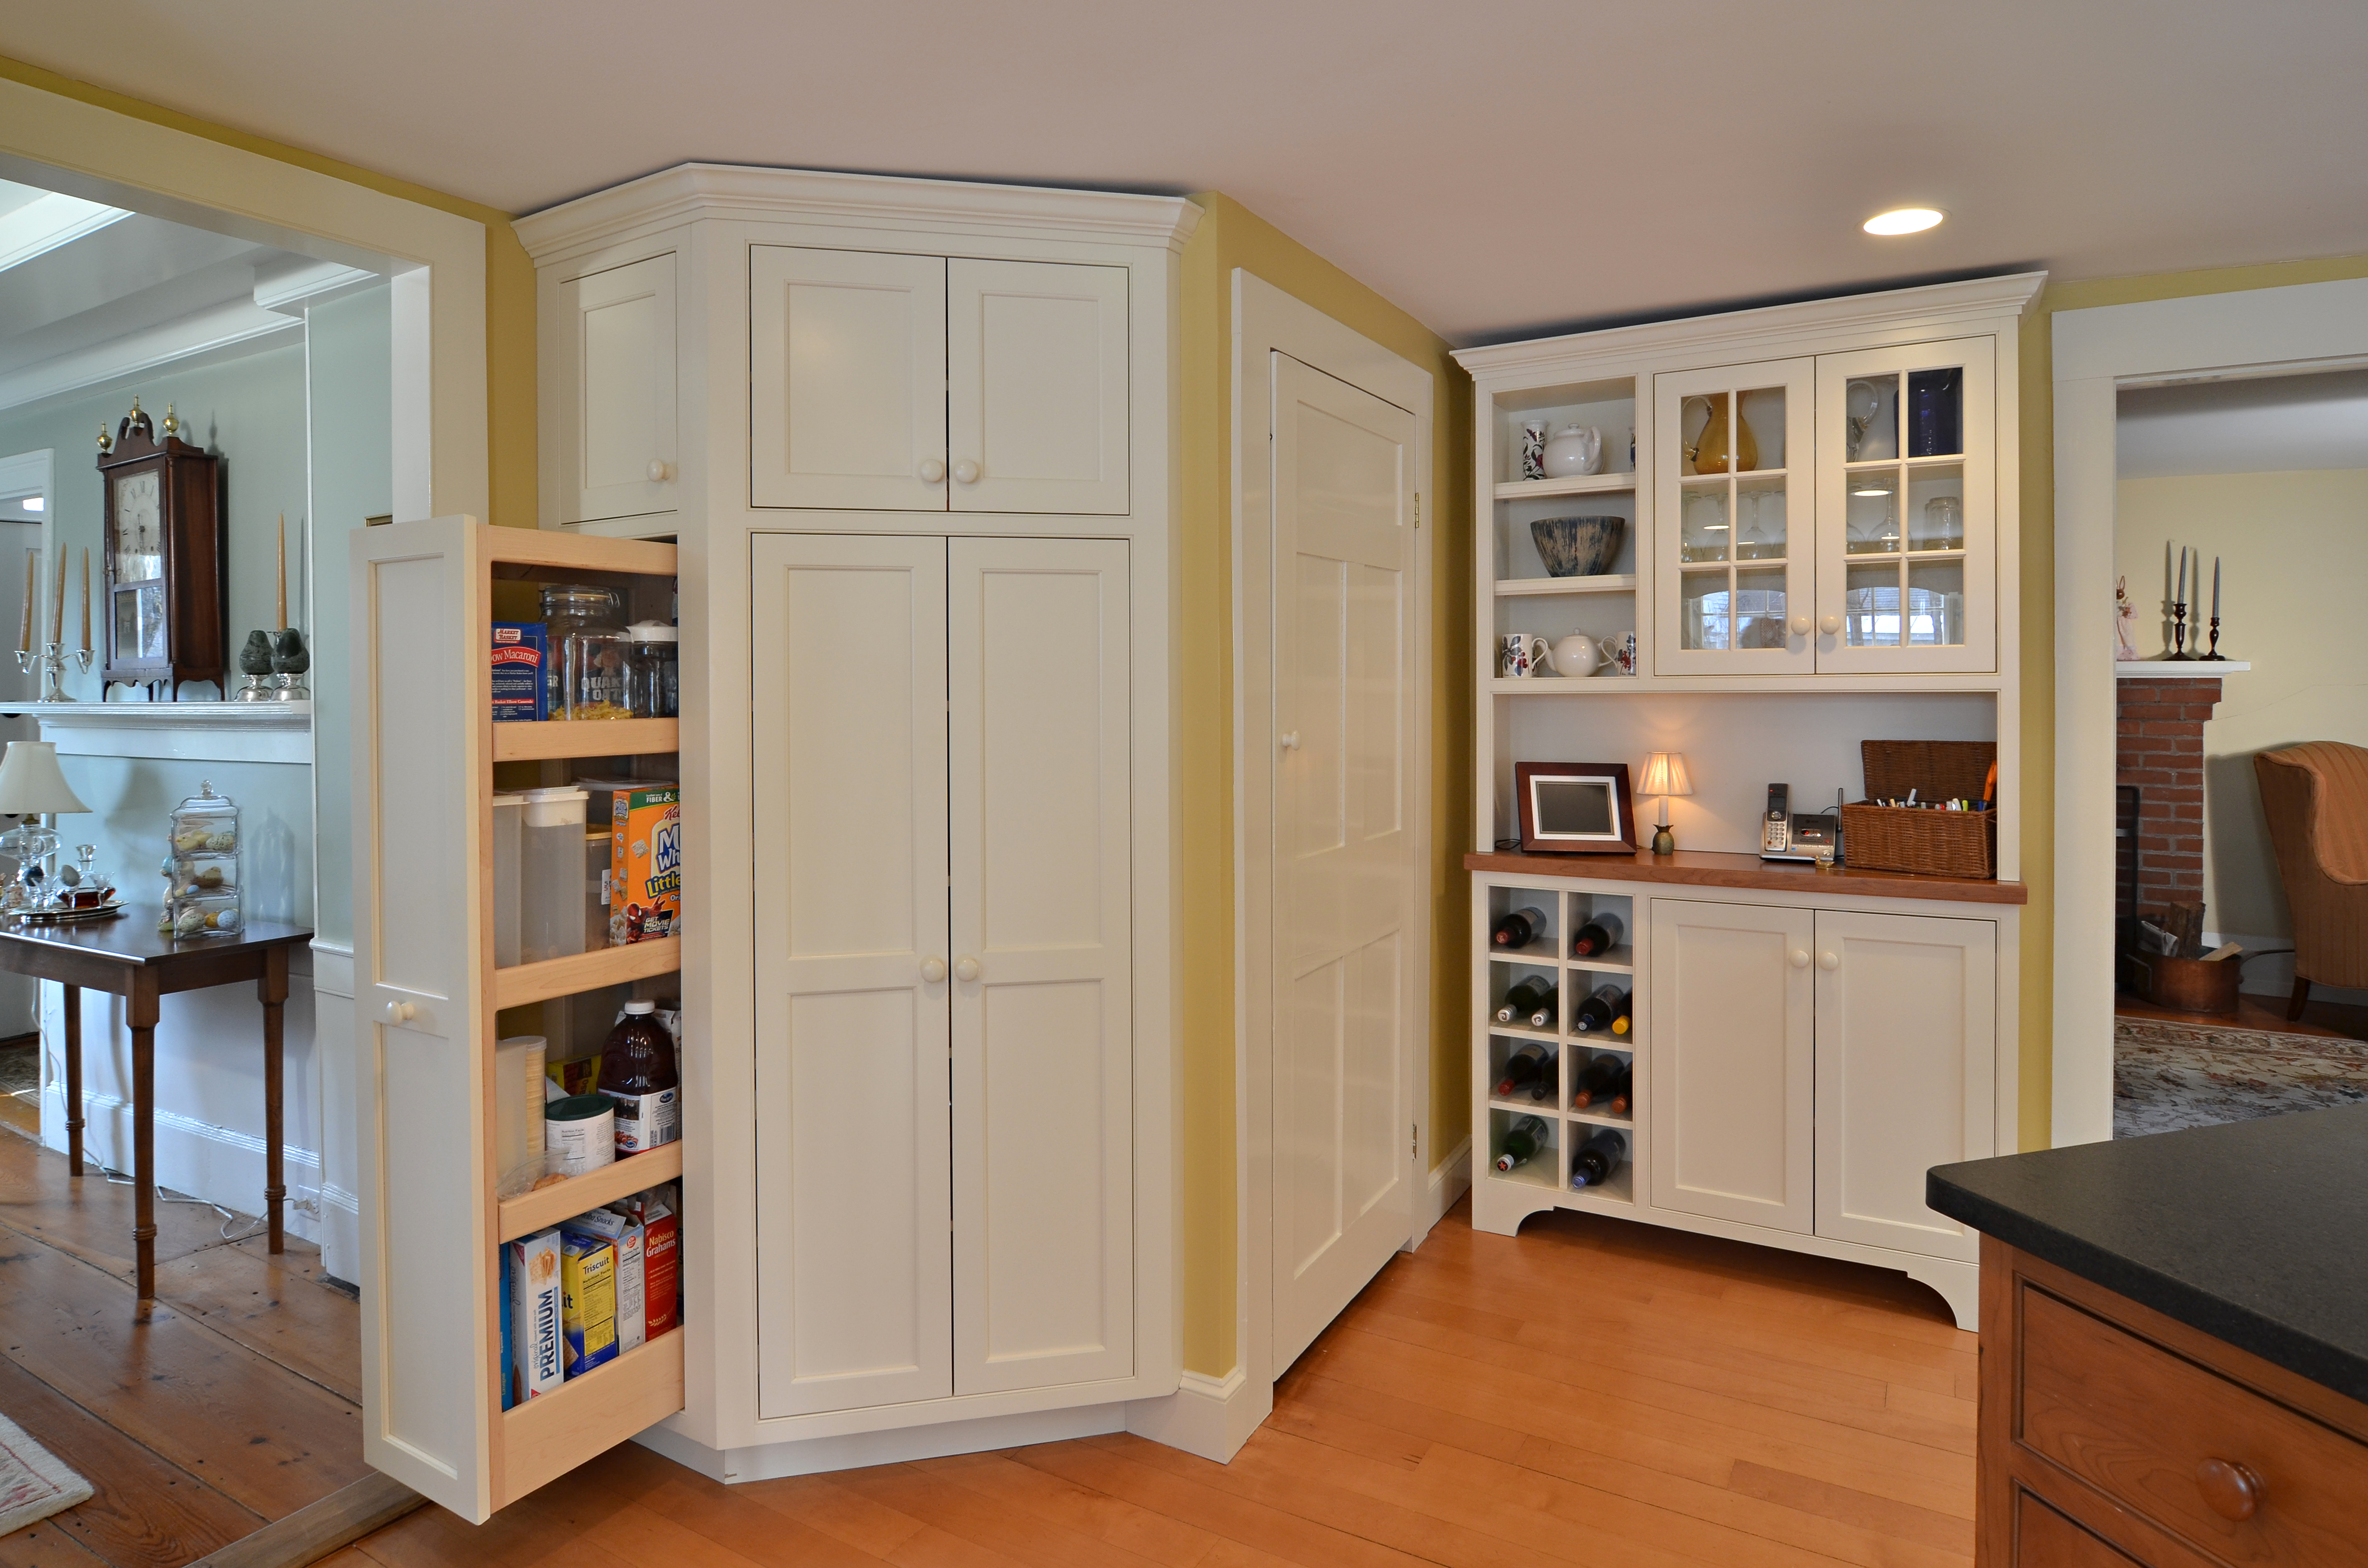 CURRIER KITCHEN PANTRY WITH SLIDE OUT Currier Kitchens